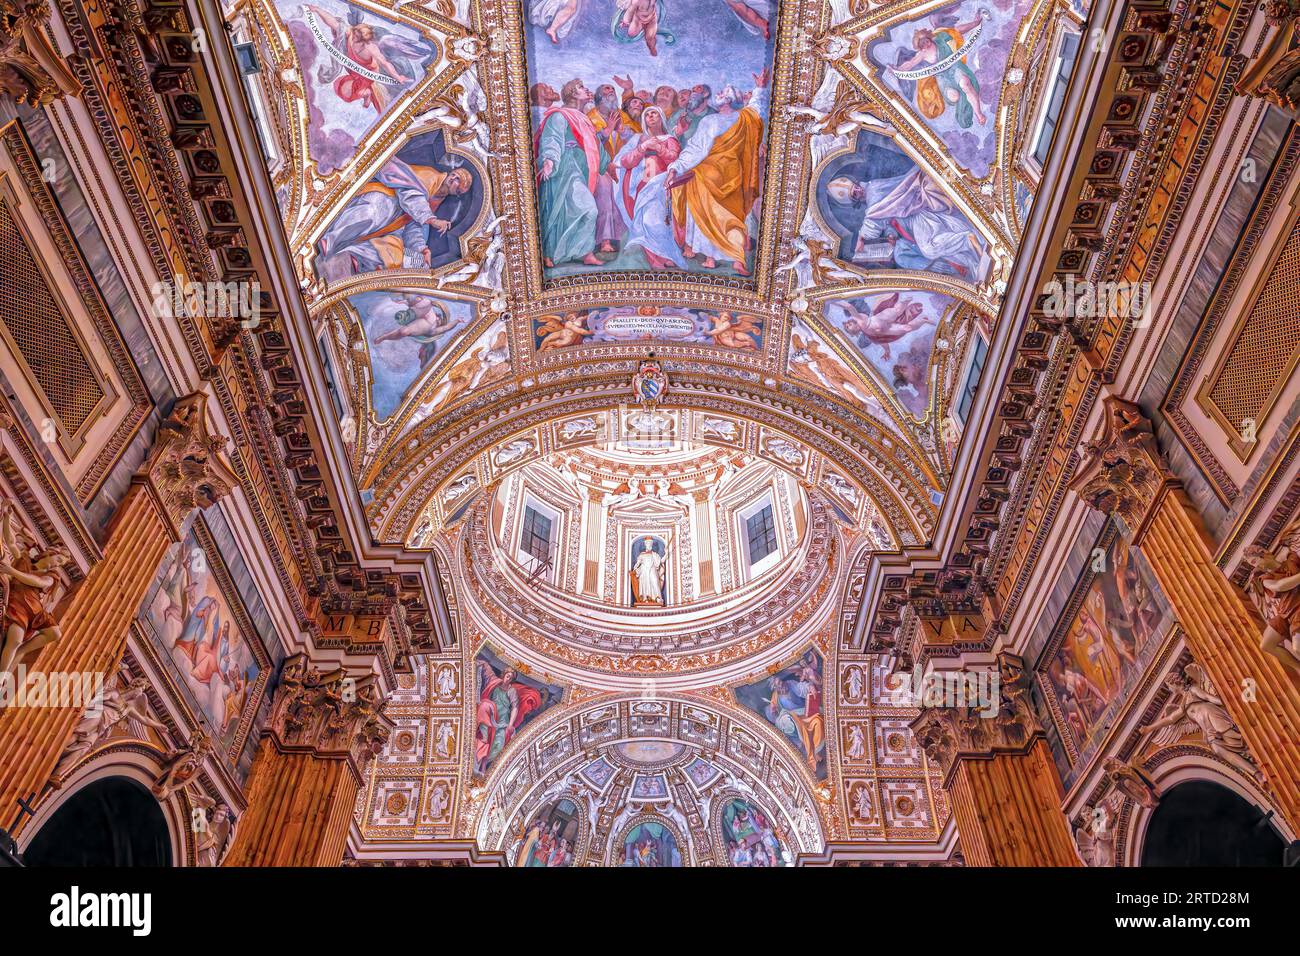 Interior of the baroque church of Santa Maria ai Monti in the historic center of Rome, Italy, built in 1603. The two domes and part of the fresco on t Stock Photo